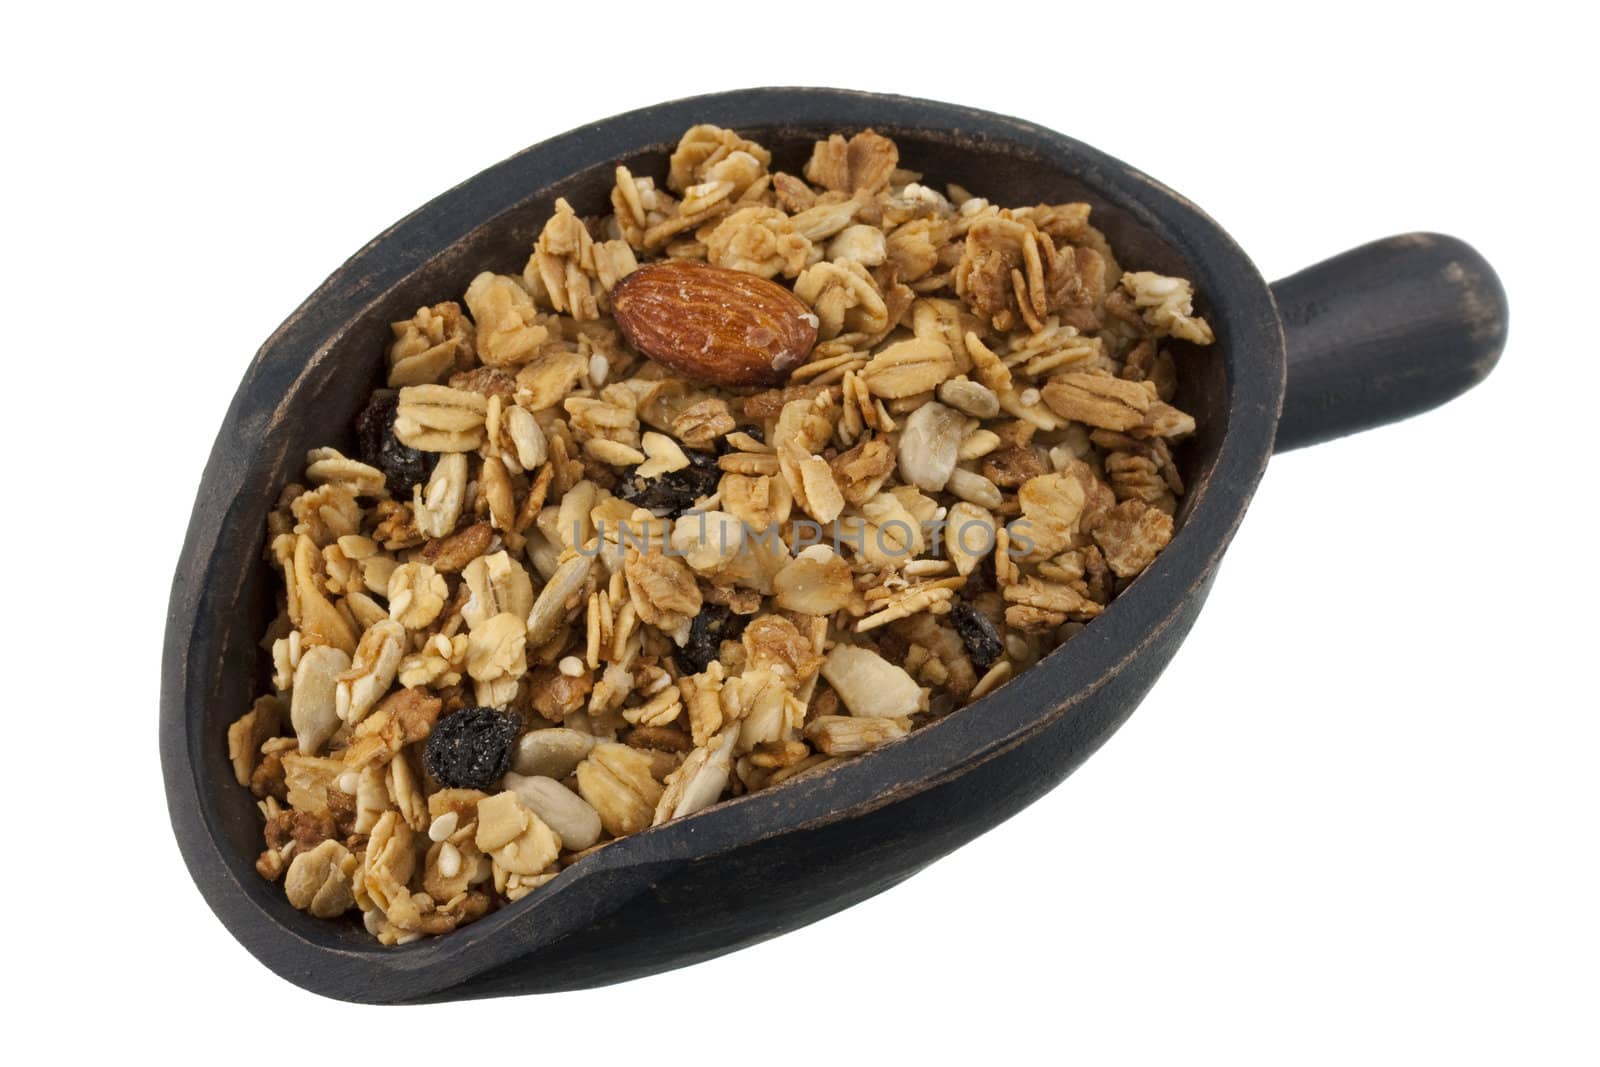 natural granola with raisins, sunflower seeds, almonds and other nuts on a rustic, wooden scoop, isolated on white